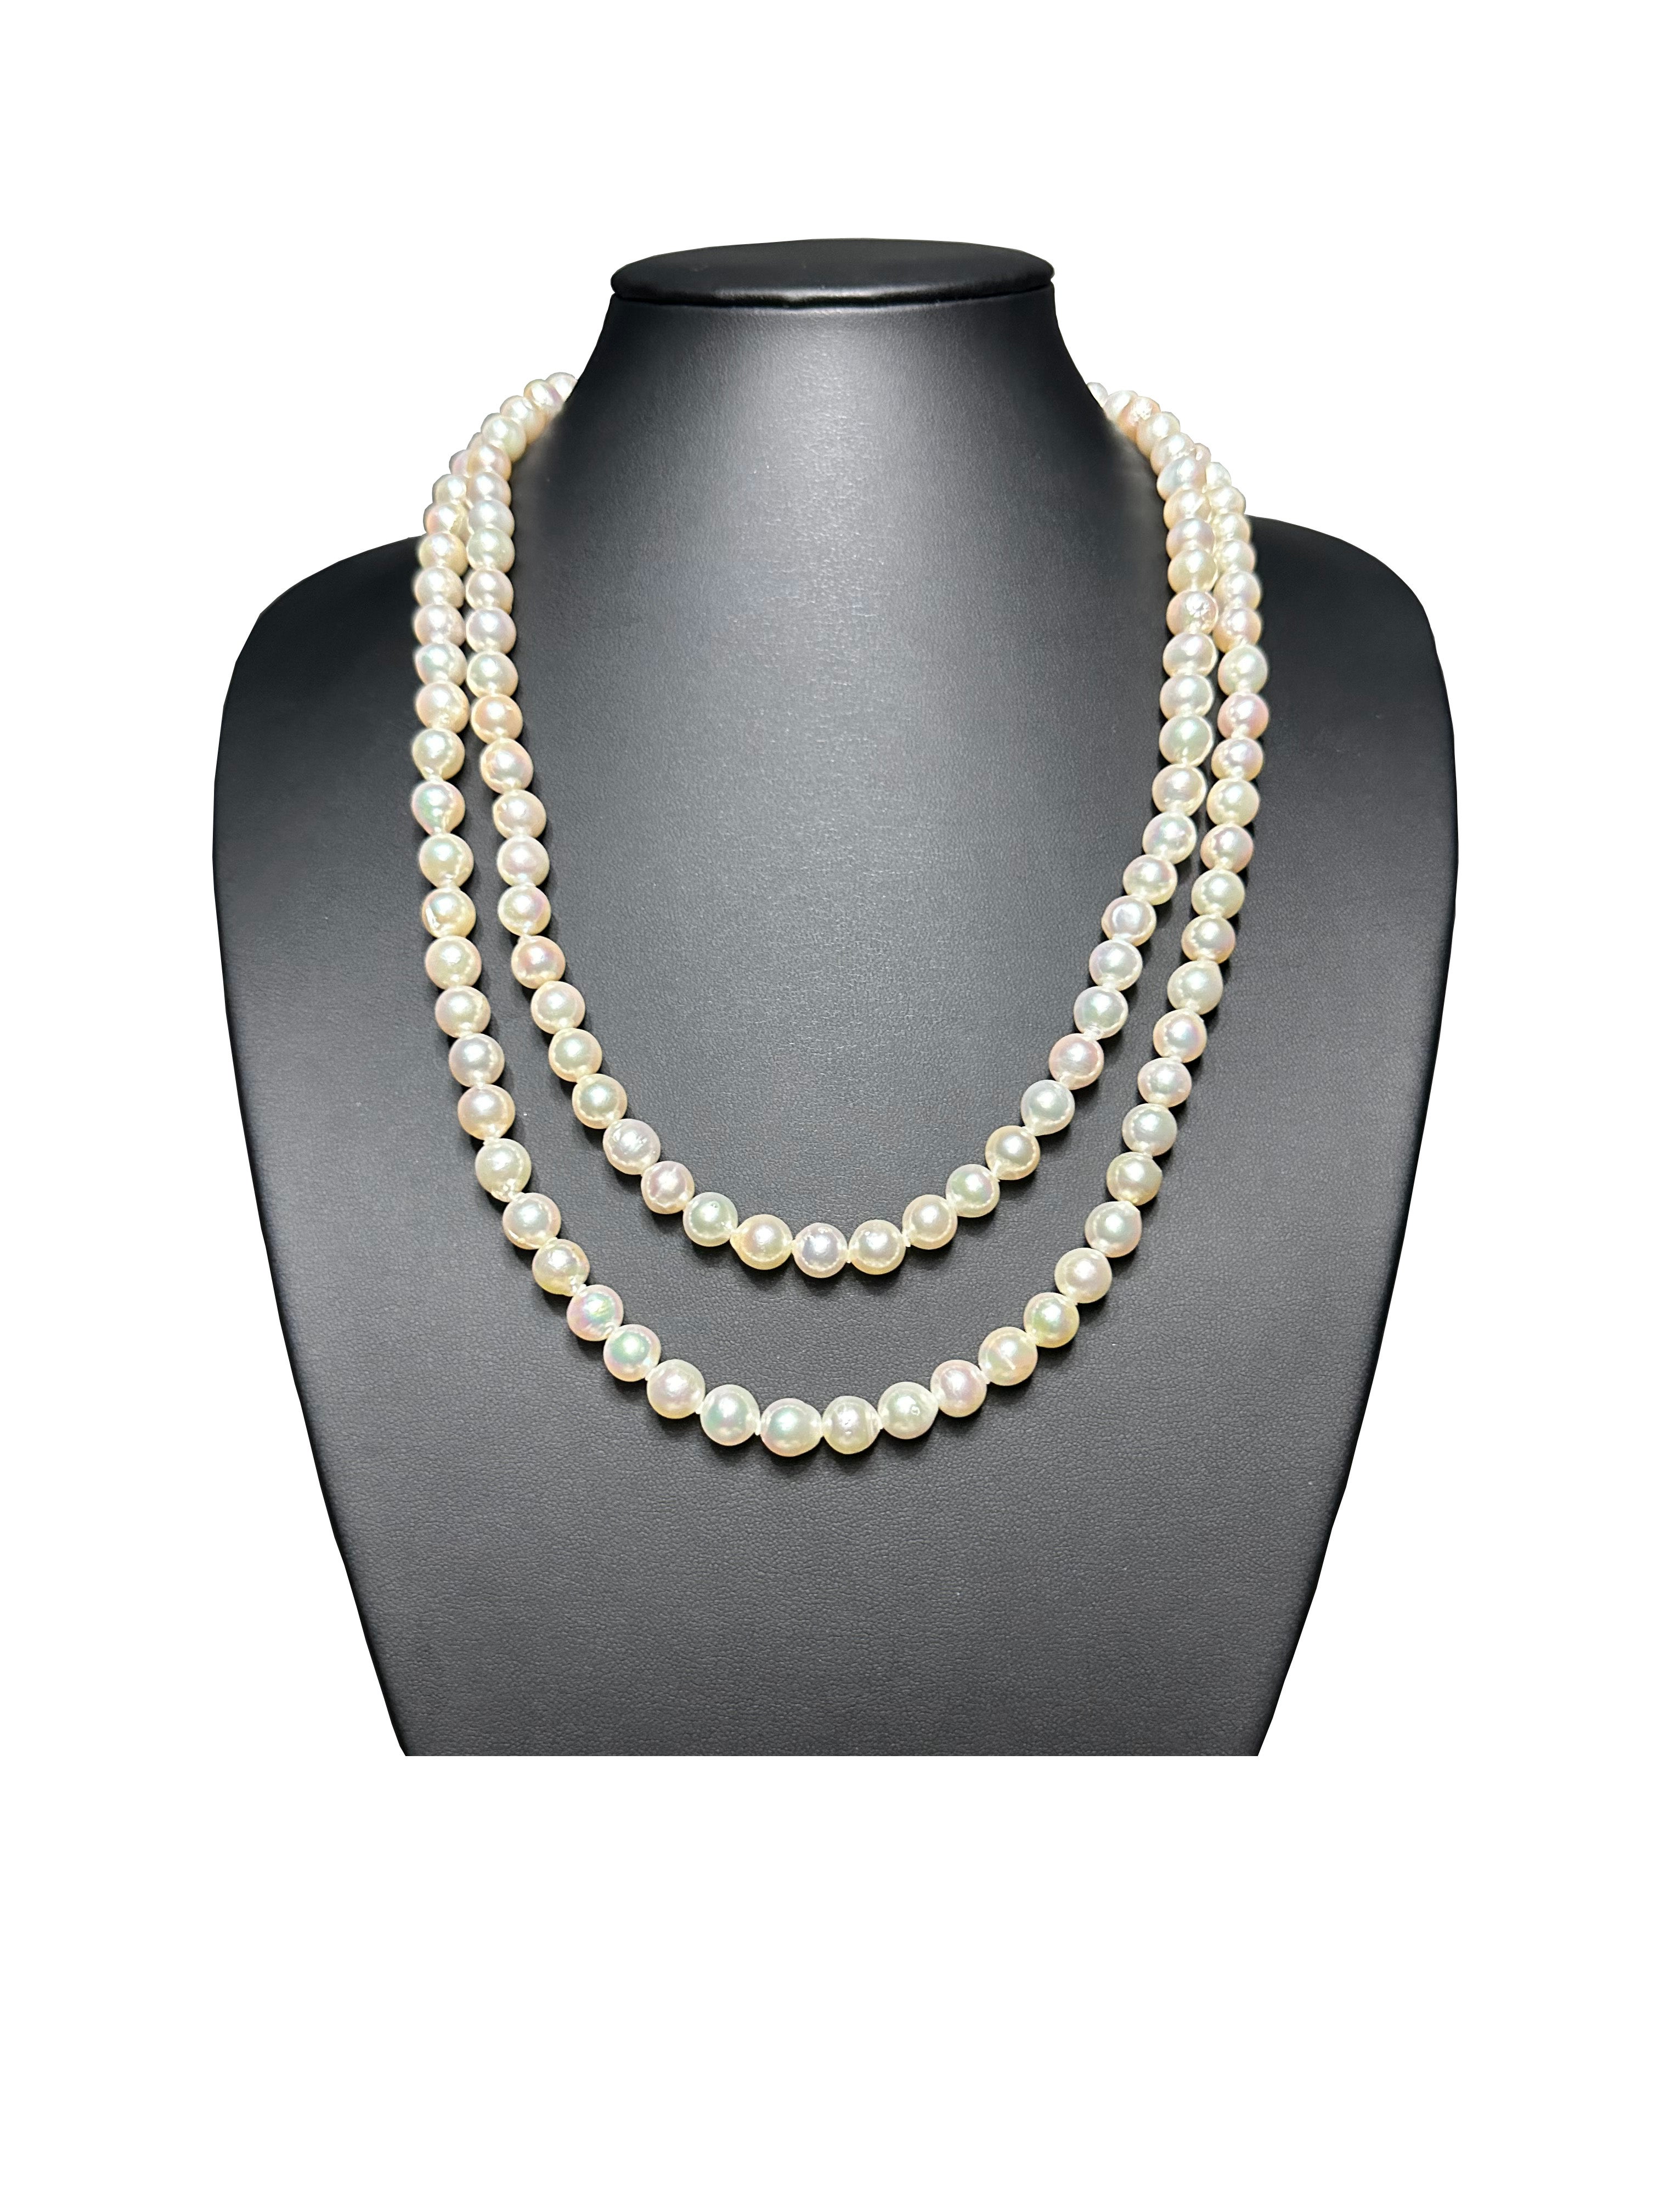 IRIS PARURE, Akoya Pearl 9.00mm×134 Necklace, Non Colored & Non Bleached Pearl For Sale